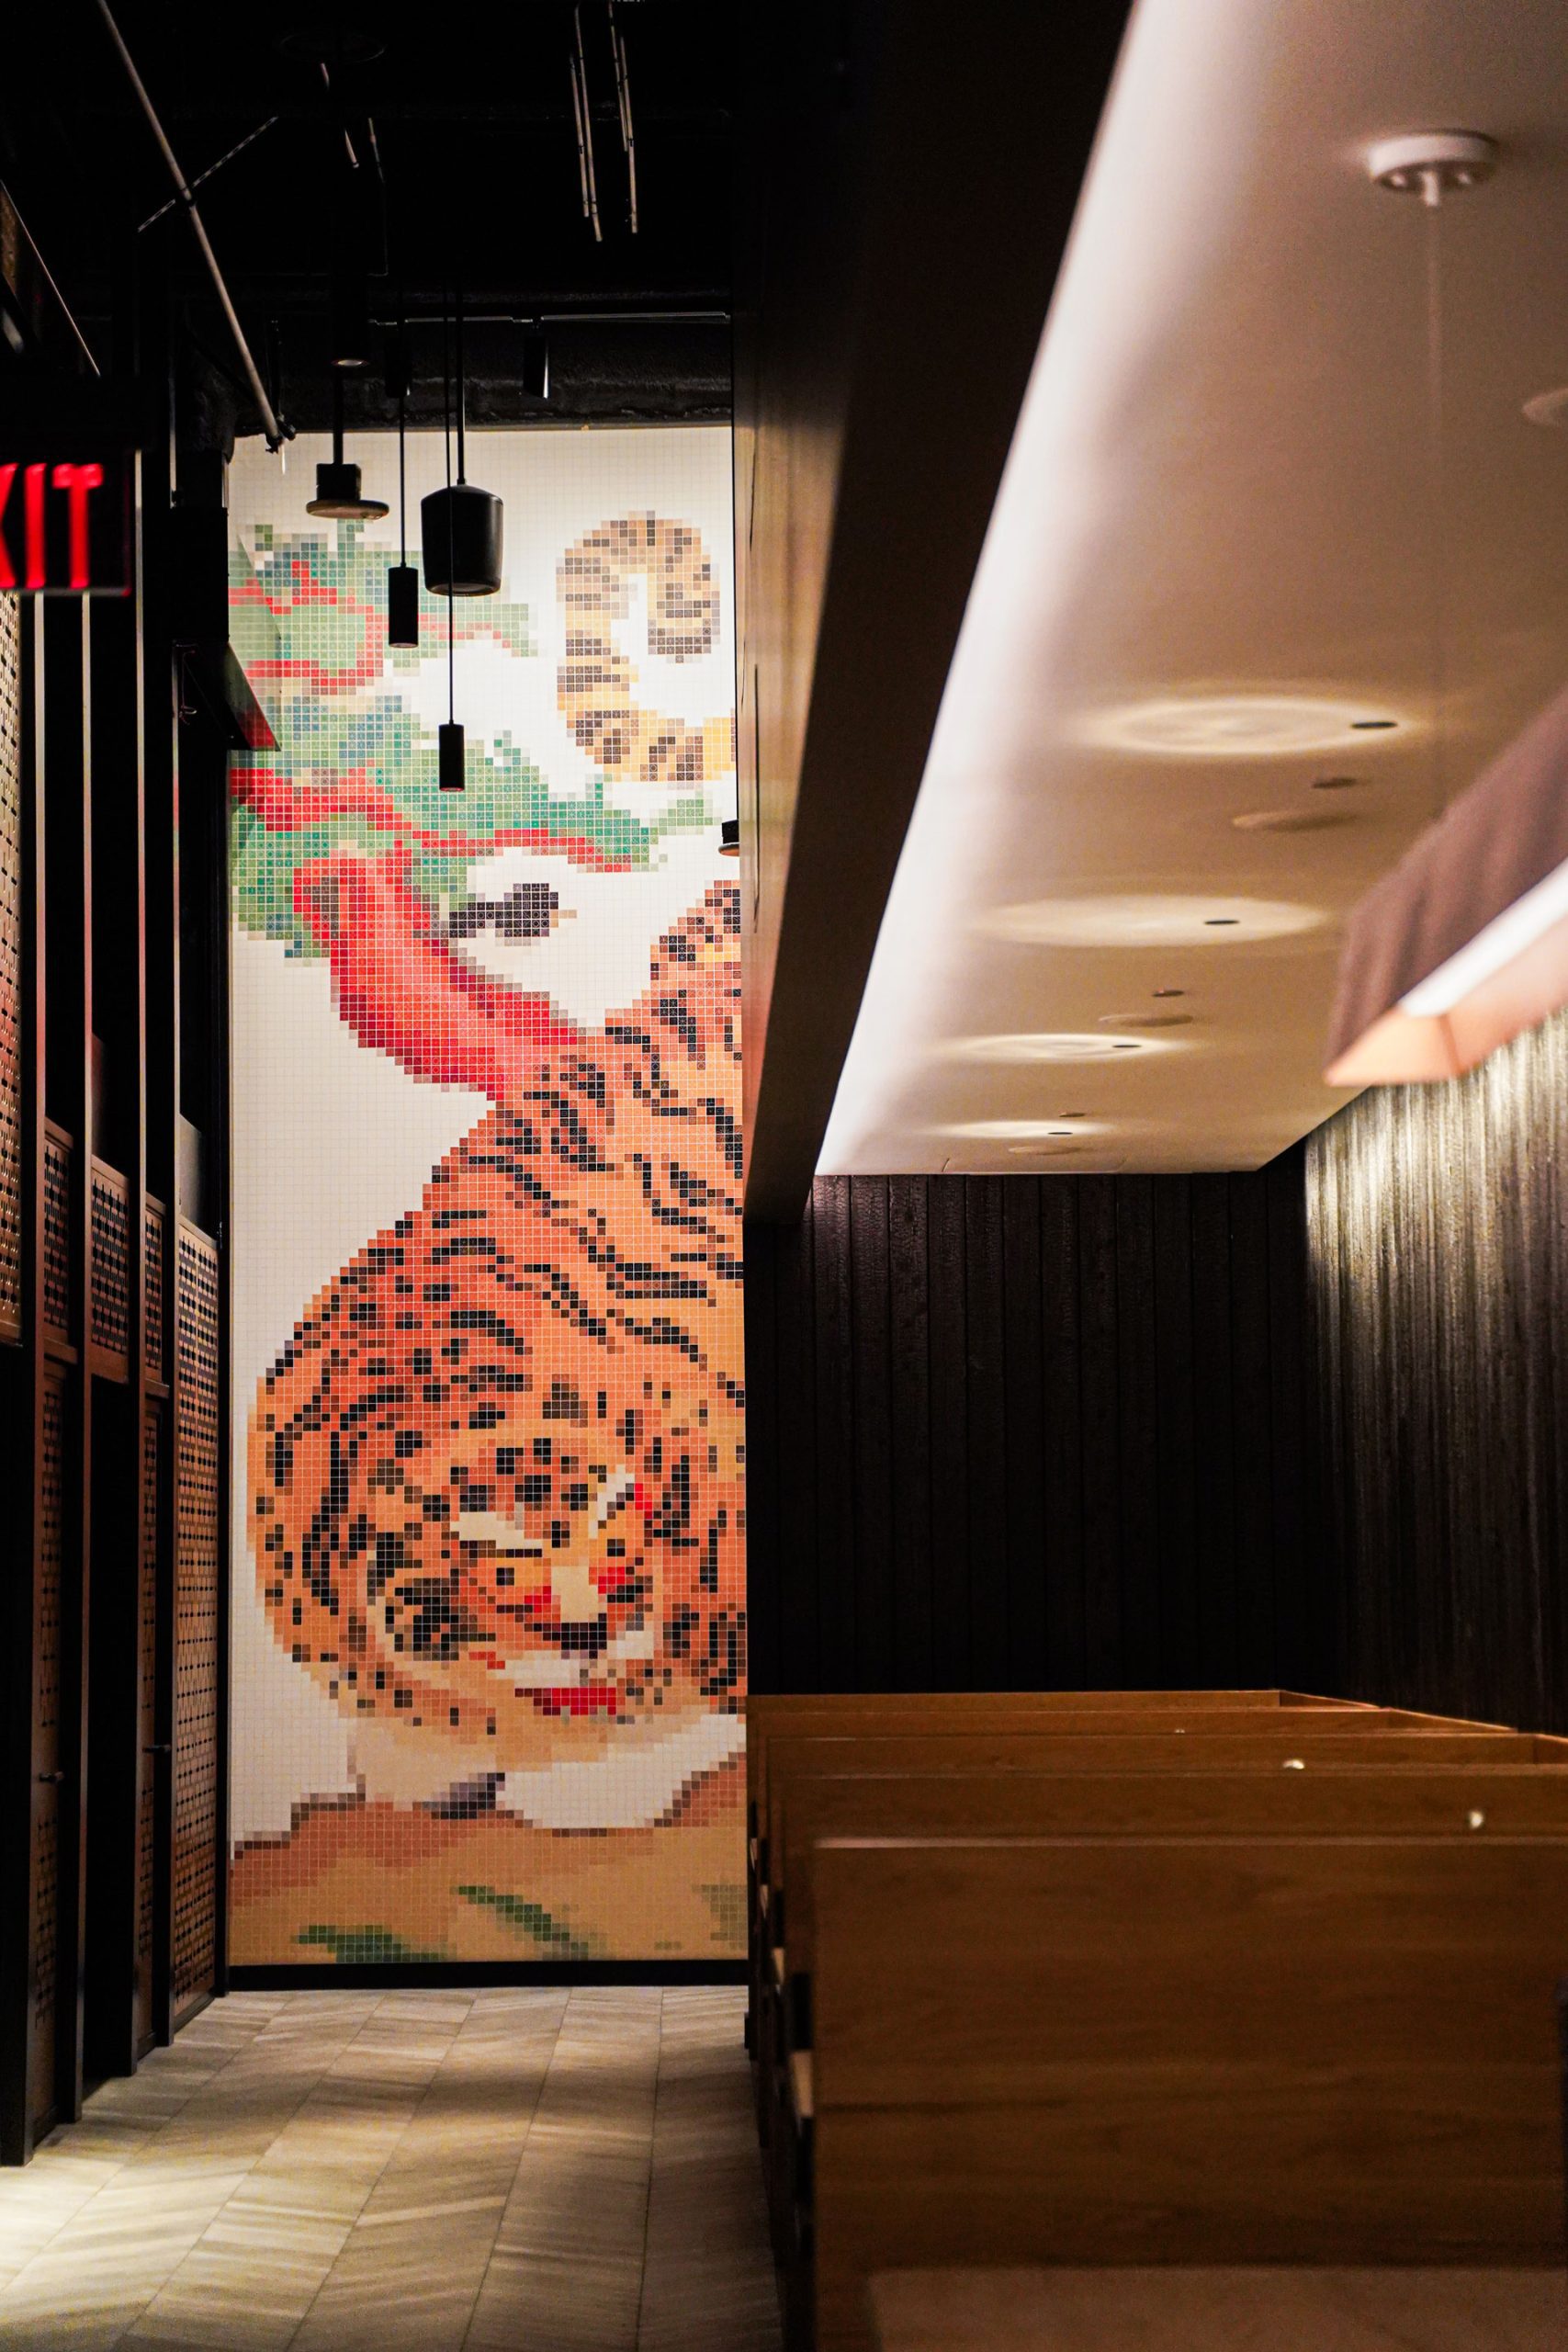 NIKU X | THRILLIST - 9 Exciting New Restaurant Openings in LA to Try This Weekend